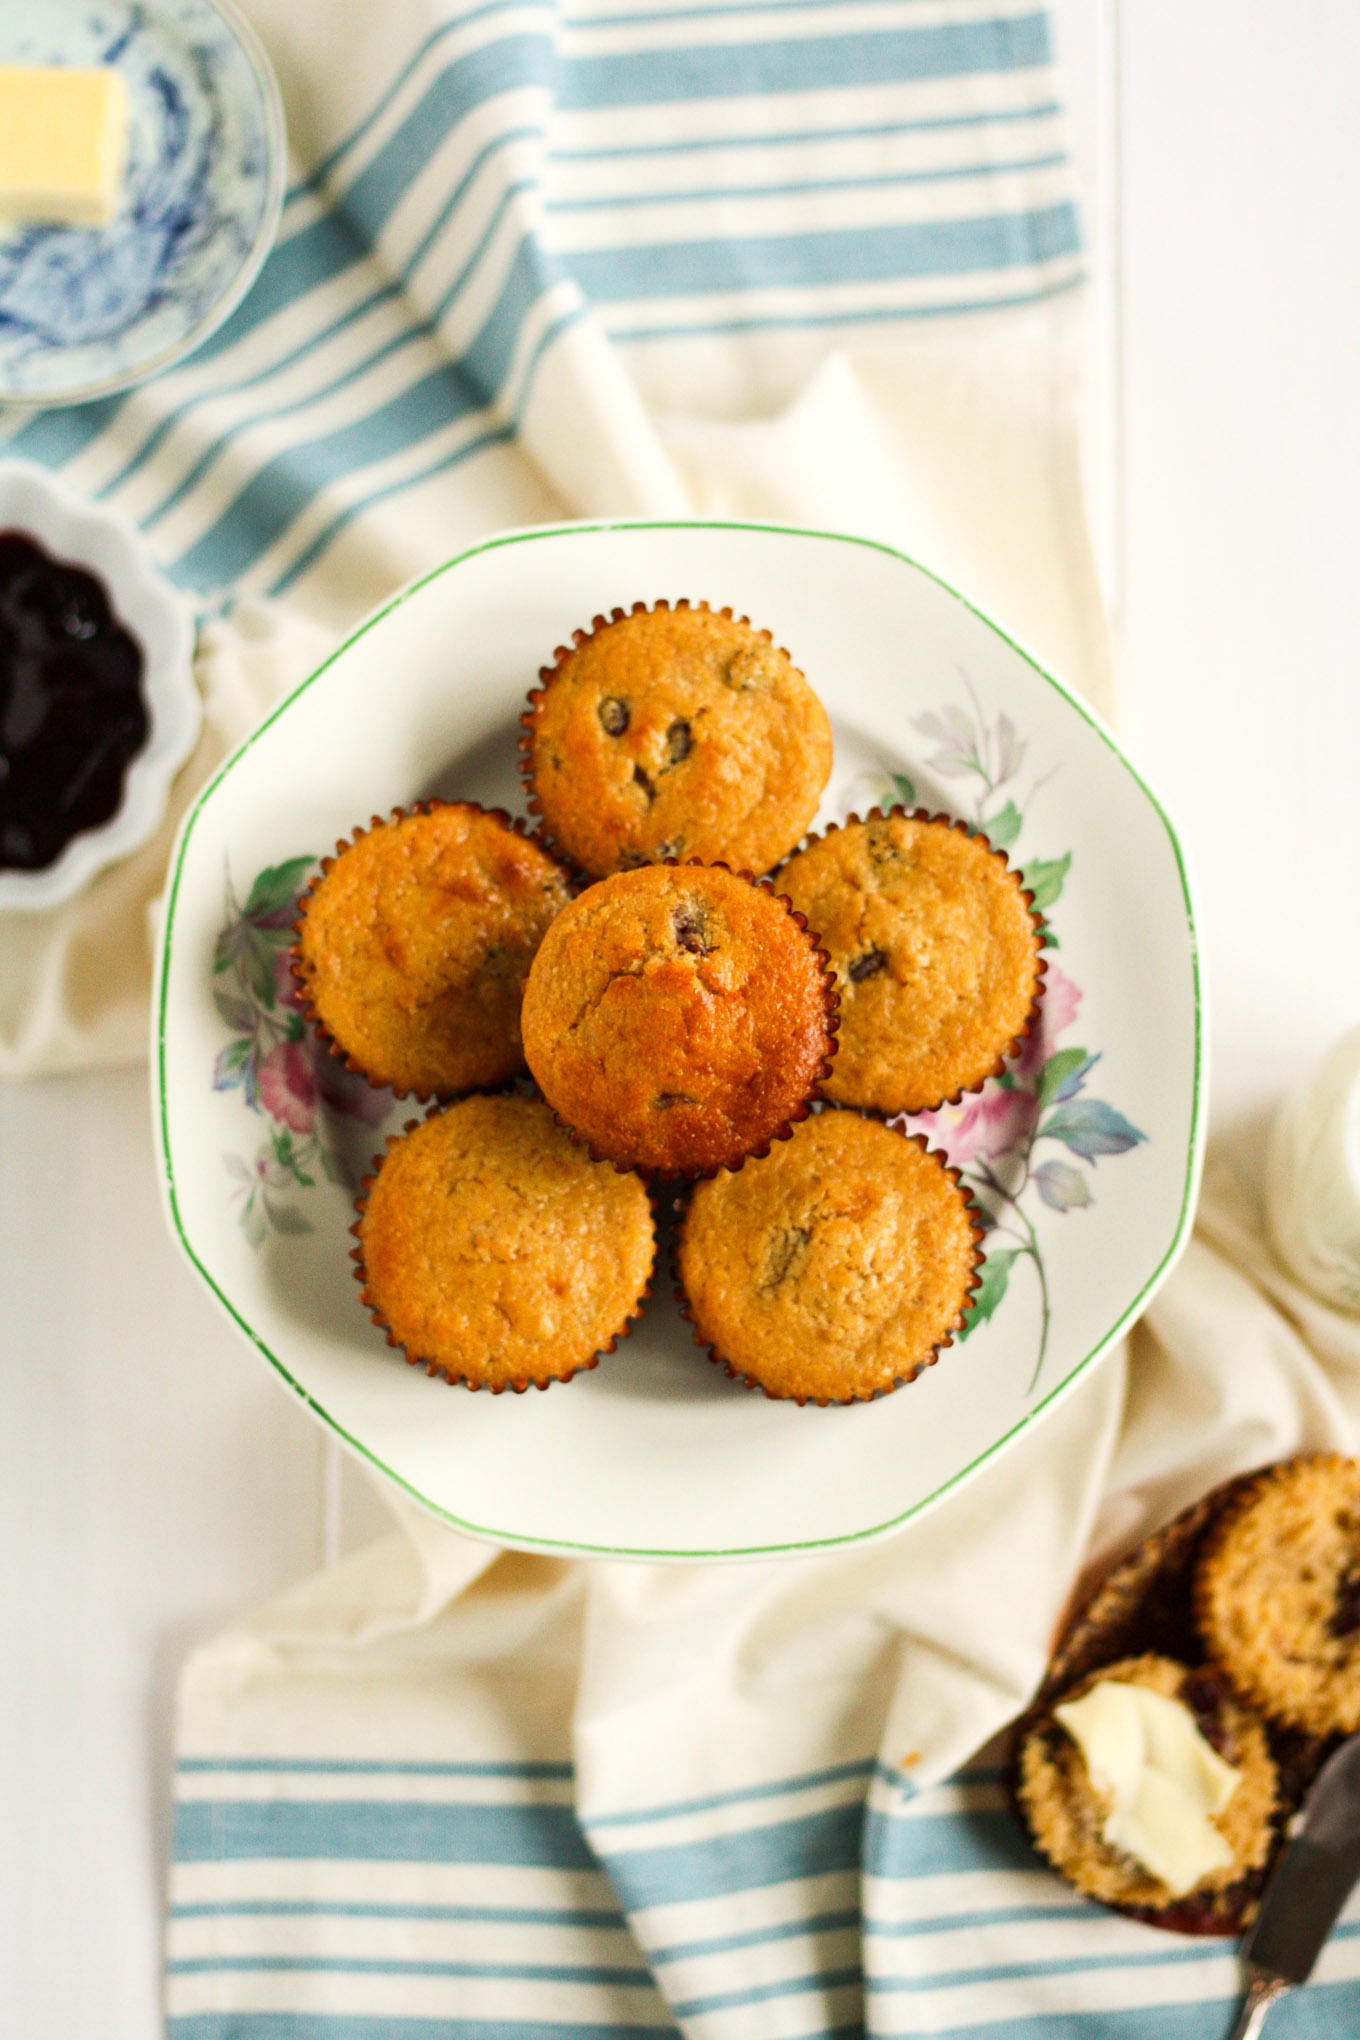 multigrain muffins with white and whole wheat flour, corn meal, oats, and plump cranberries